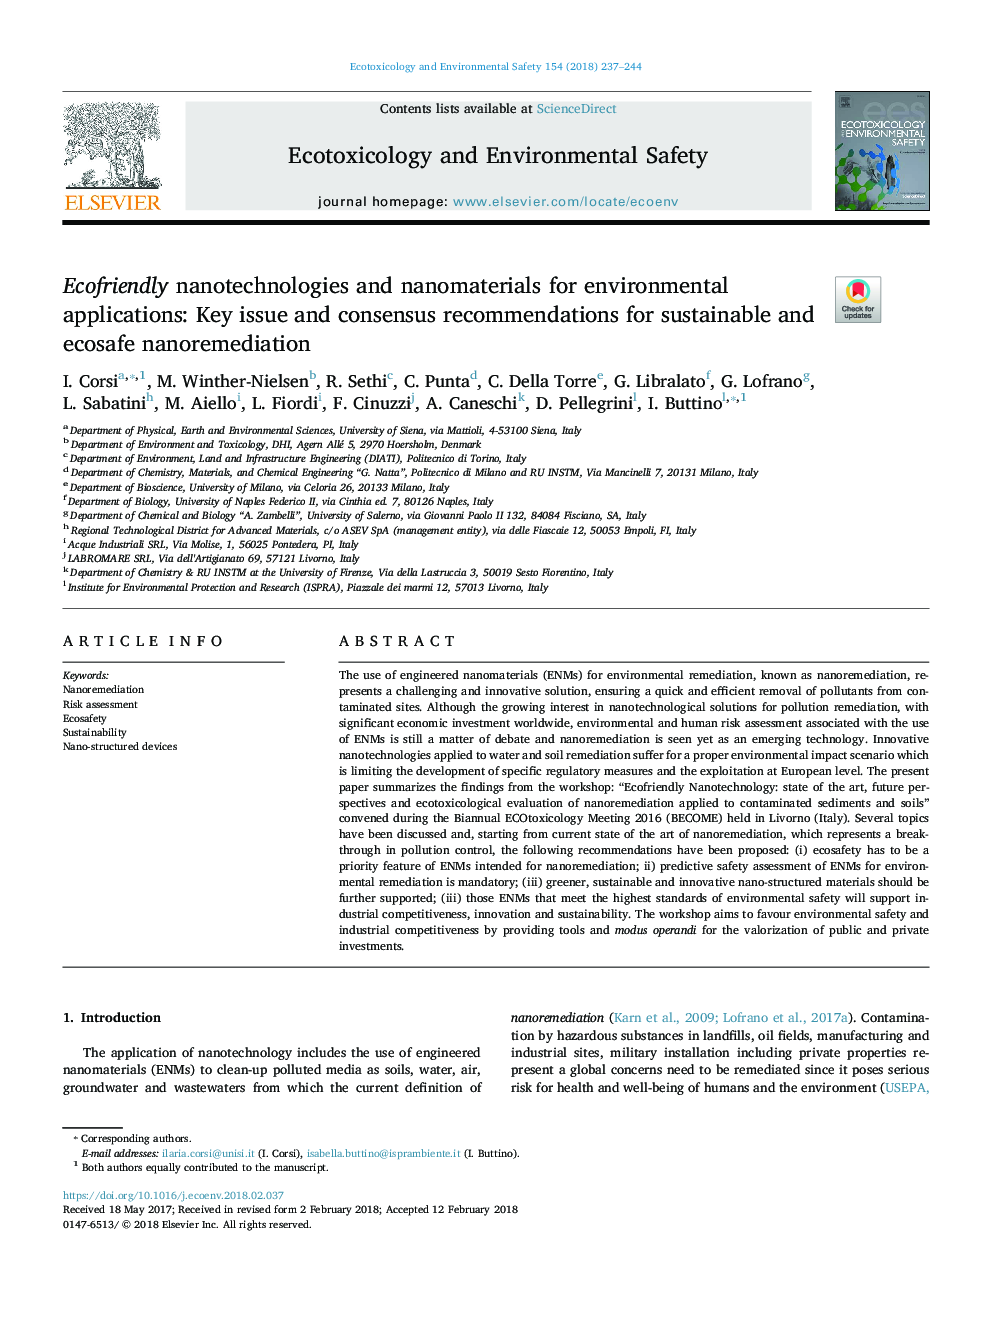 Ecofriendly nanotechnologies and nanomaterials for environmental applications: Key issue and consensus recommendations for sustainable and ecosafe nanoremediation